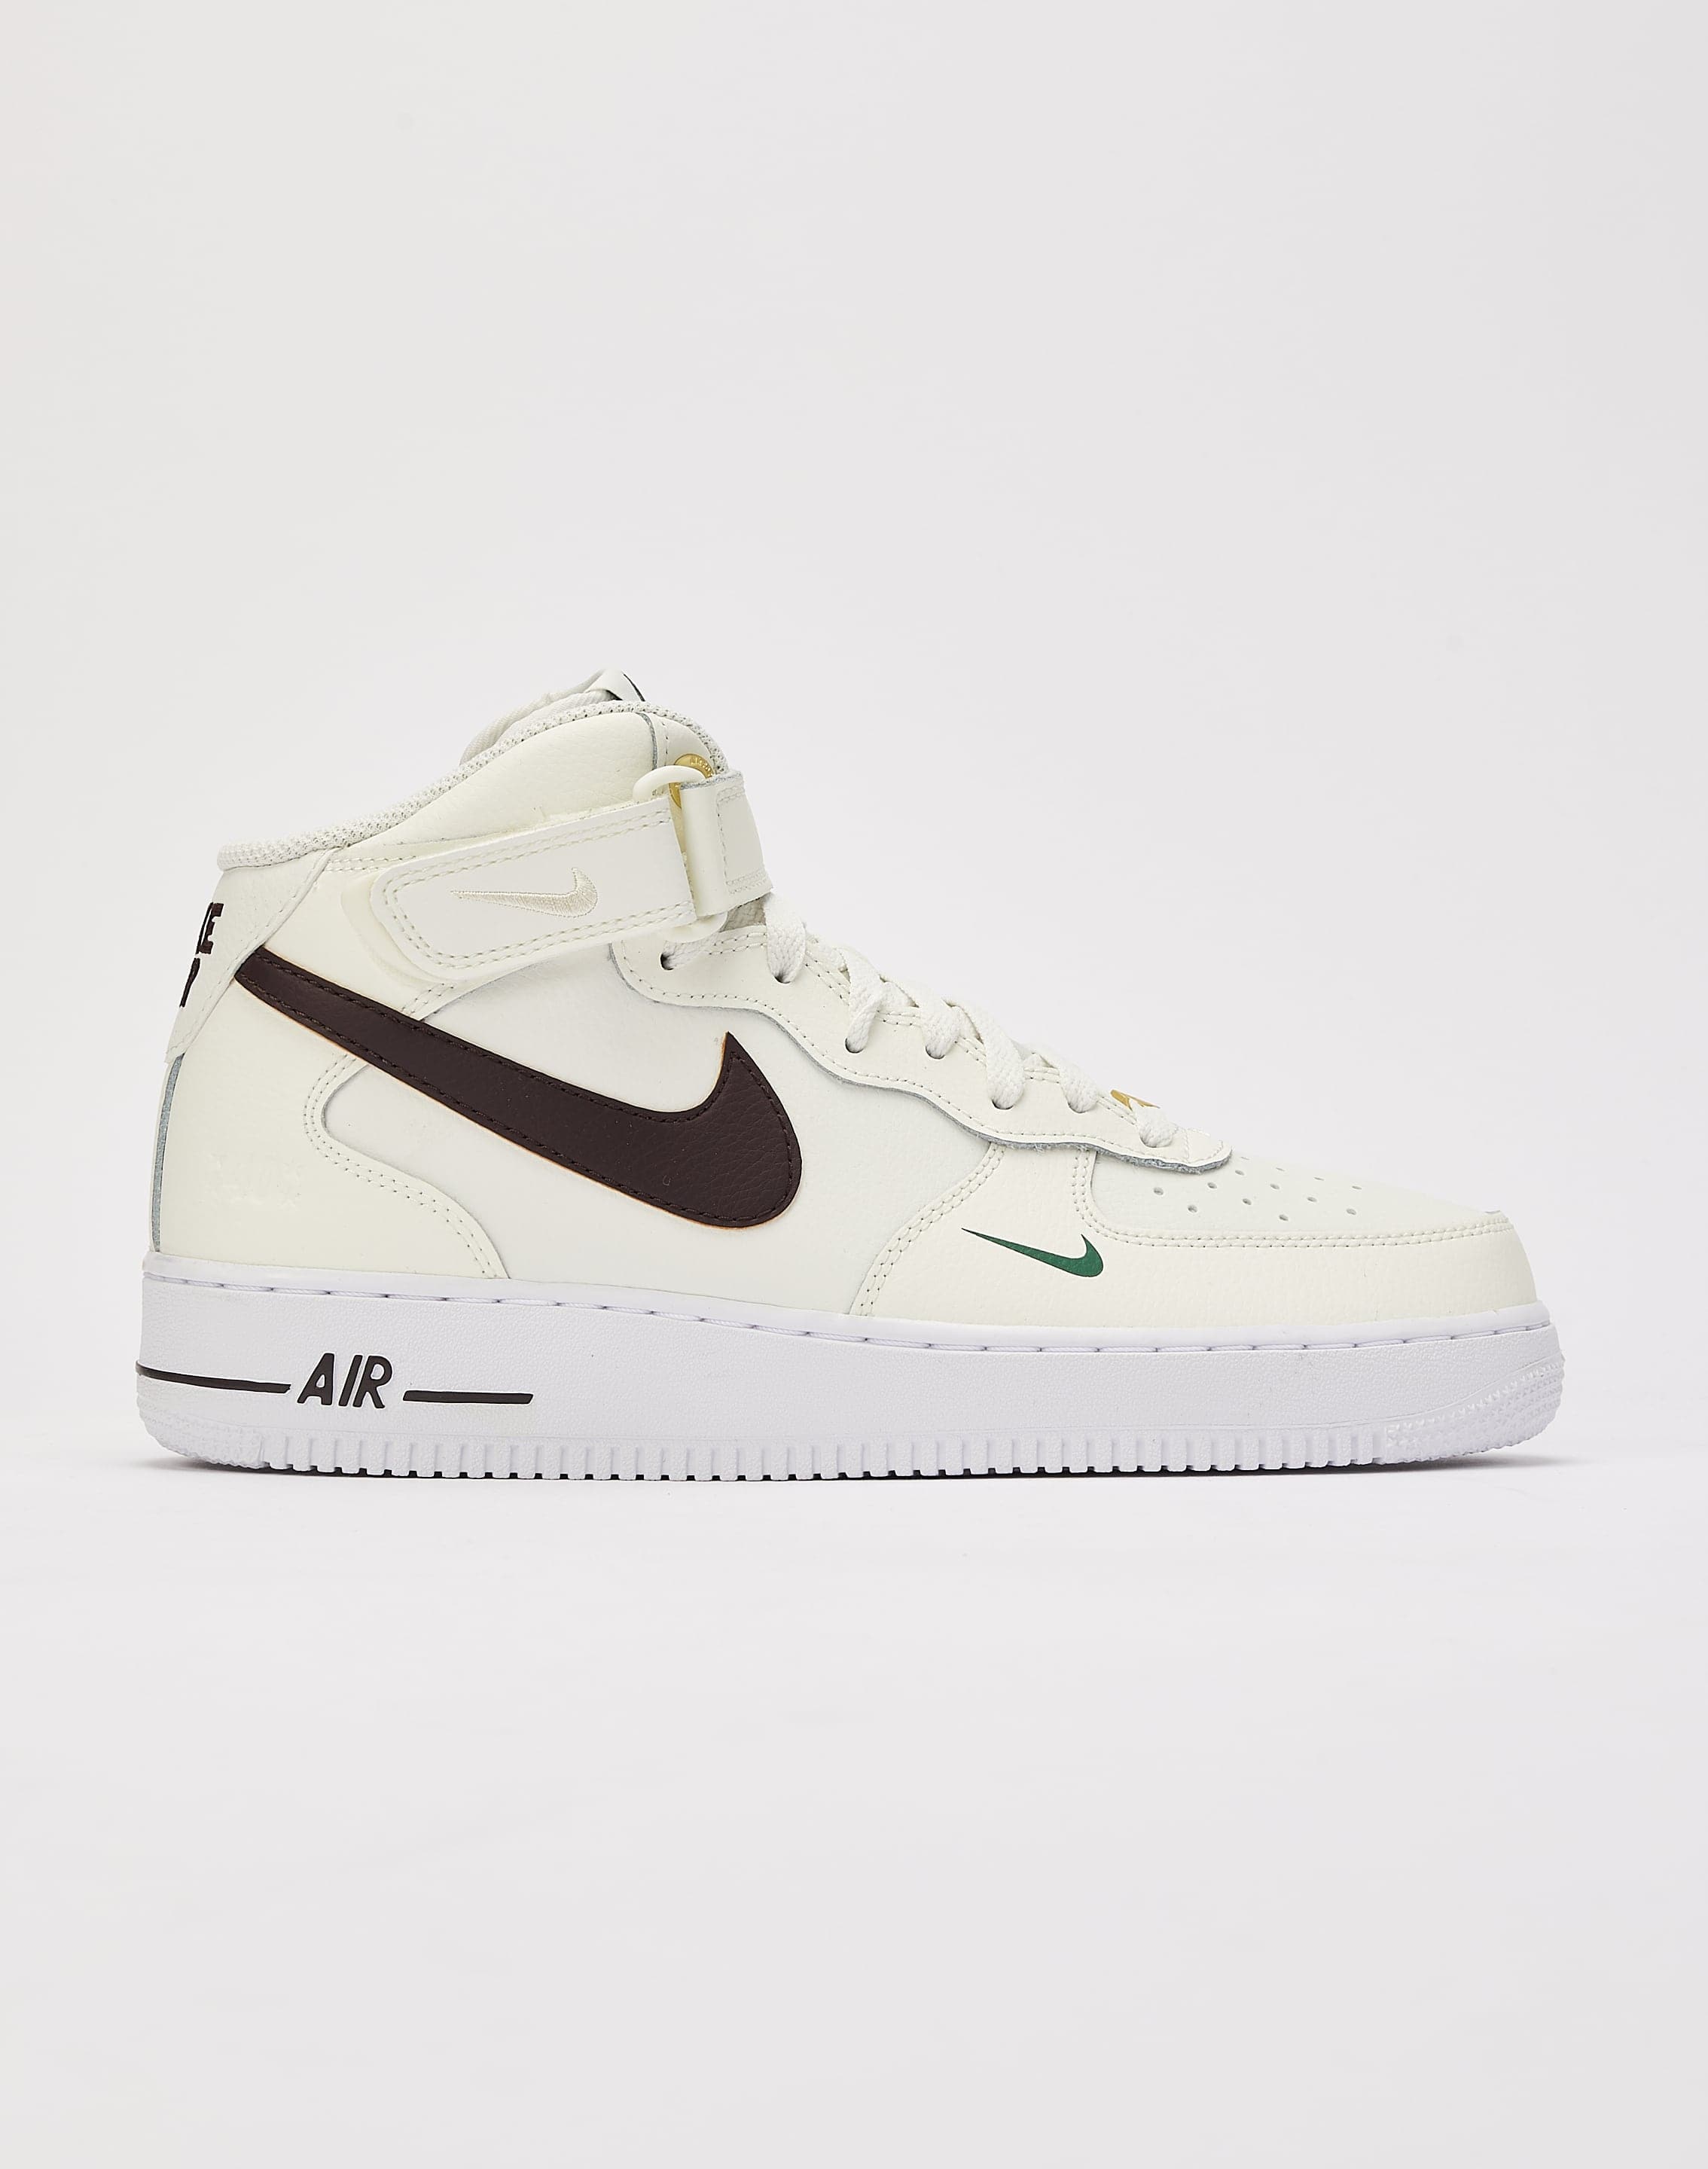 Nike AIR FORCE 1 '07 HIGH LV8 – DTLR